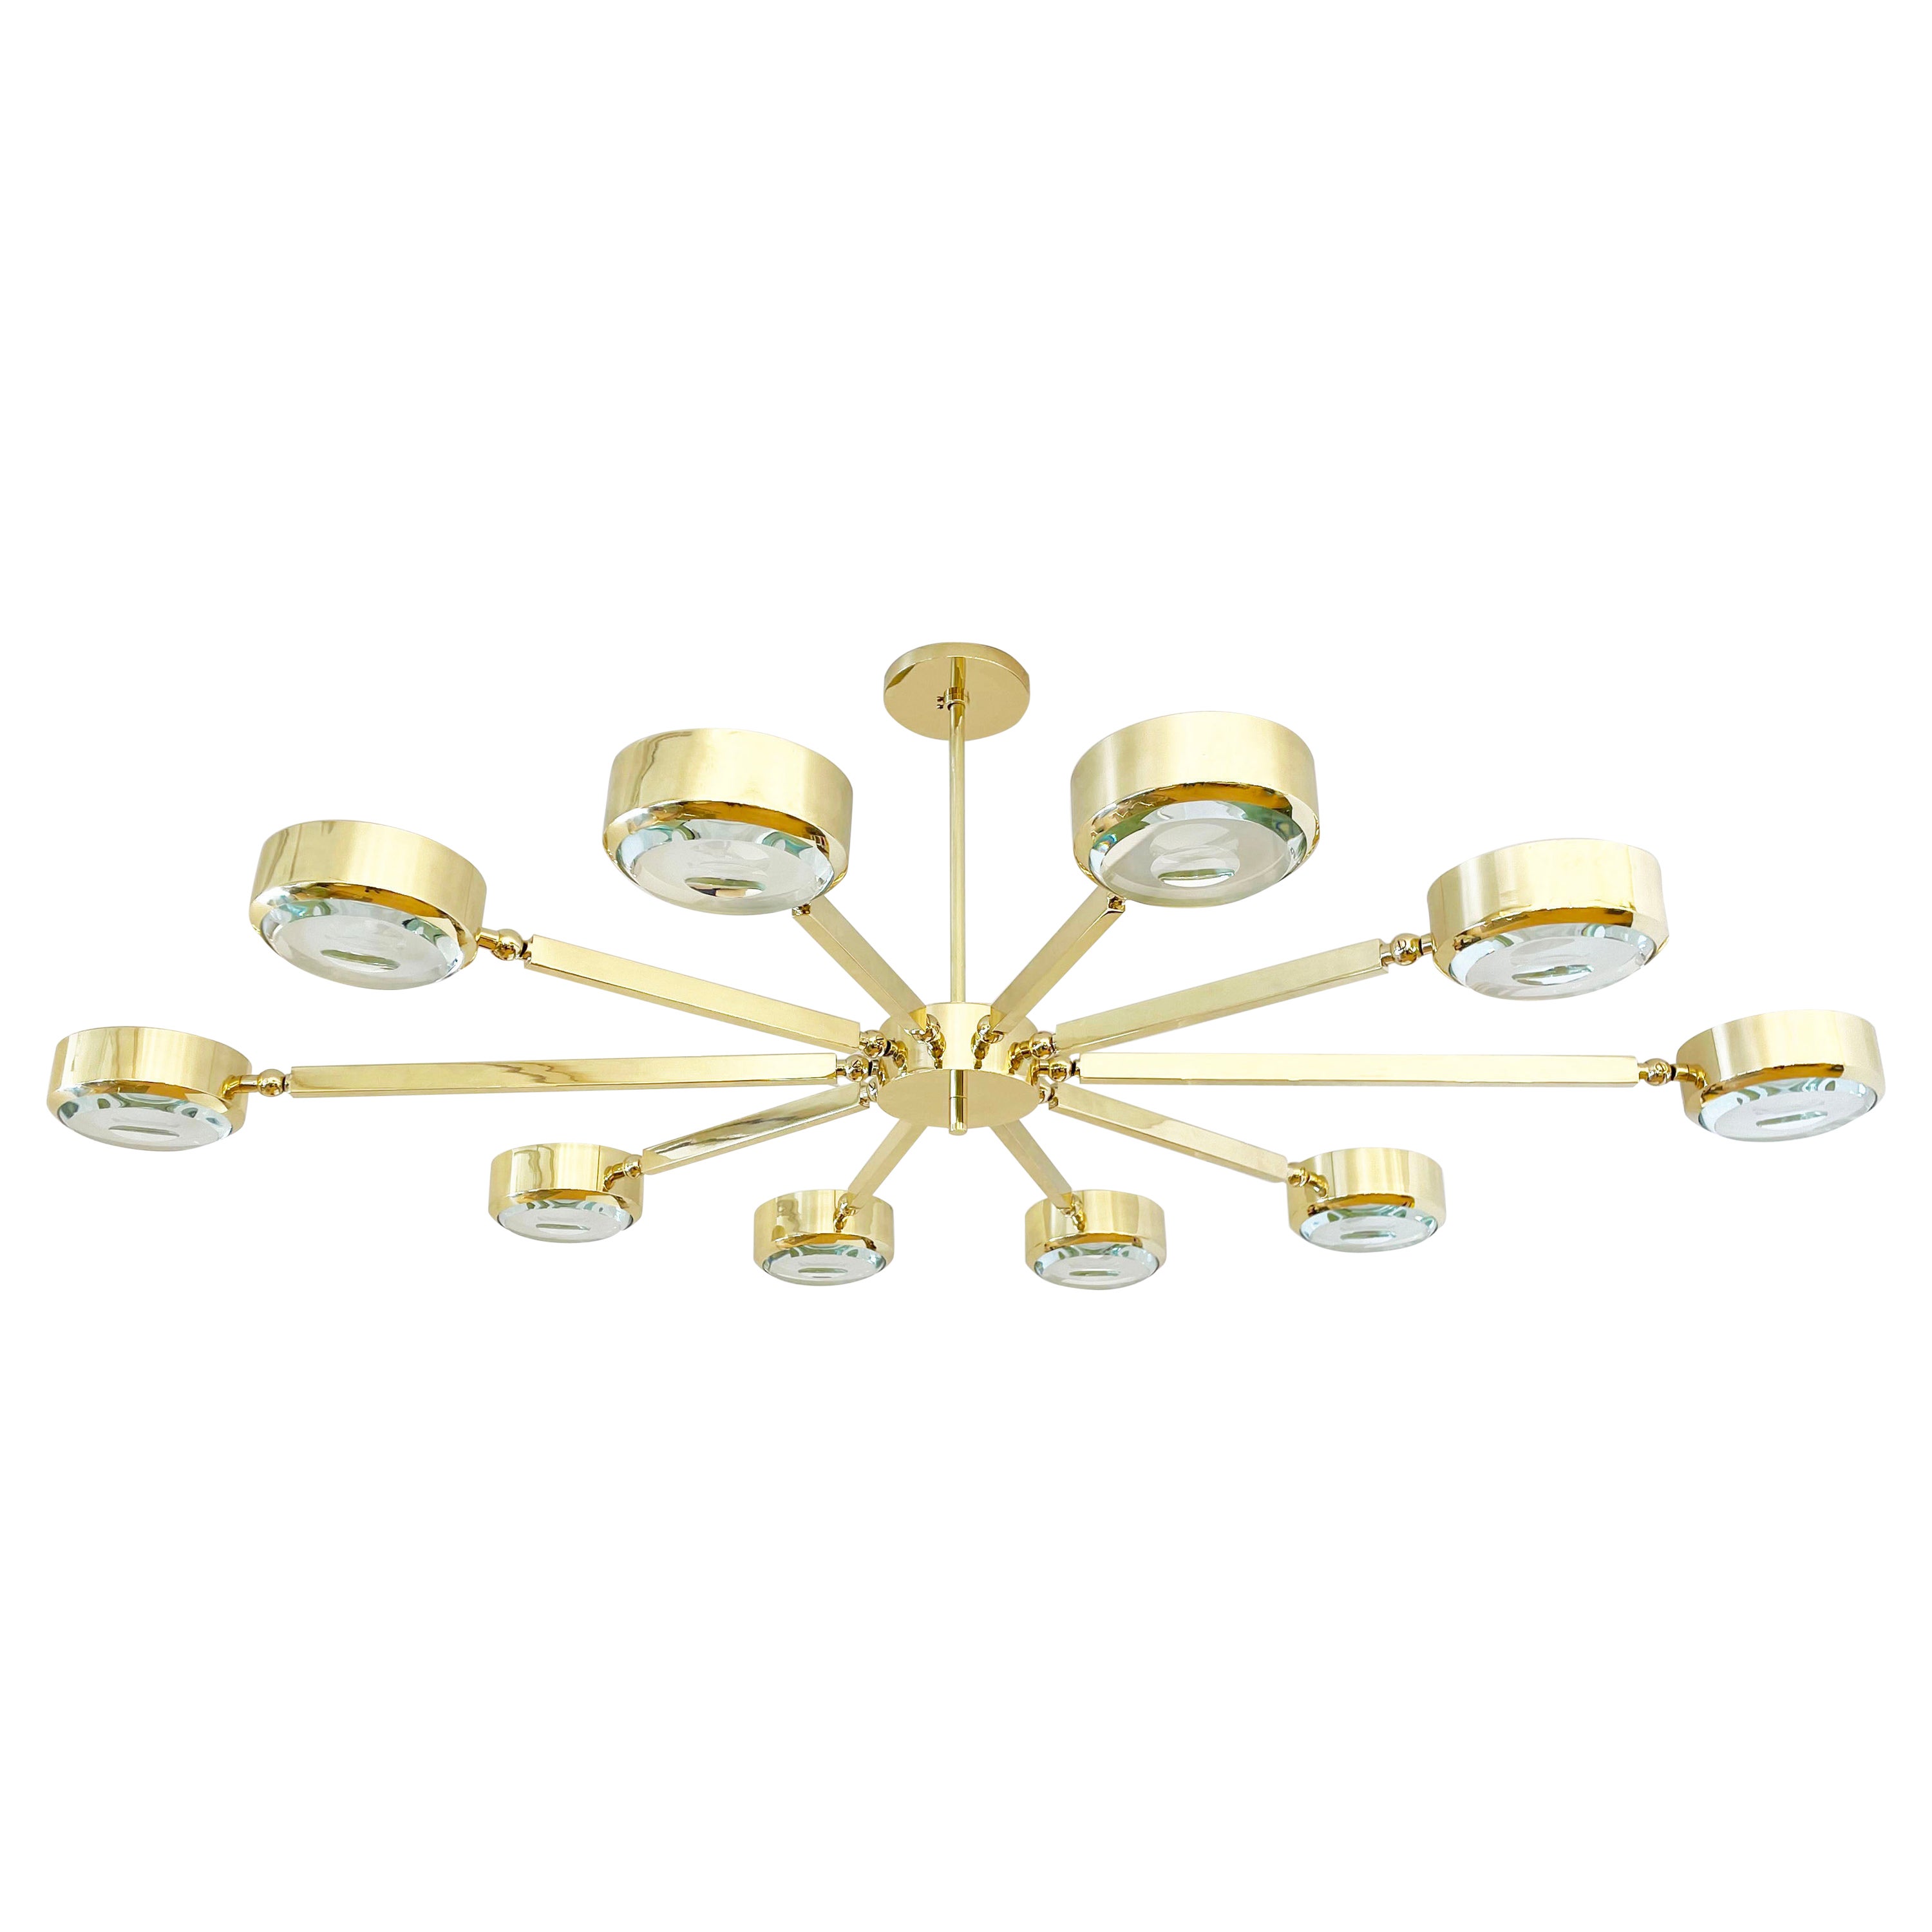 Oculus Oval Ceiling Light by Gaspare Asaro- Bronze Finish with Carved Glass In New Condition For Sale In New York, NY